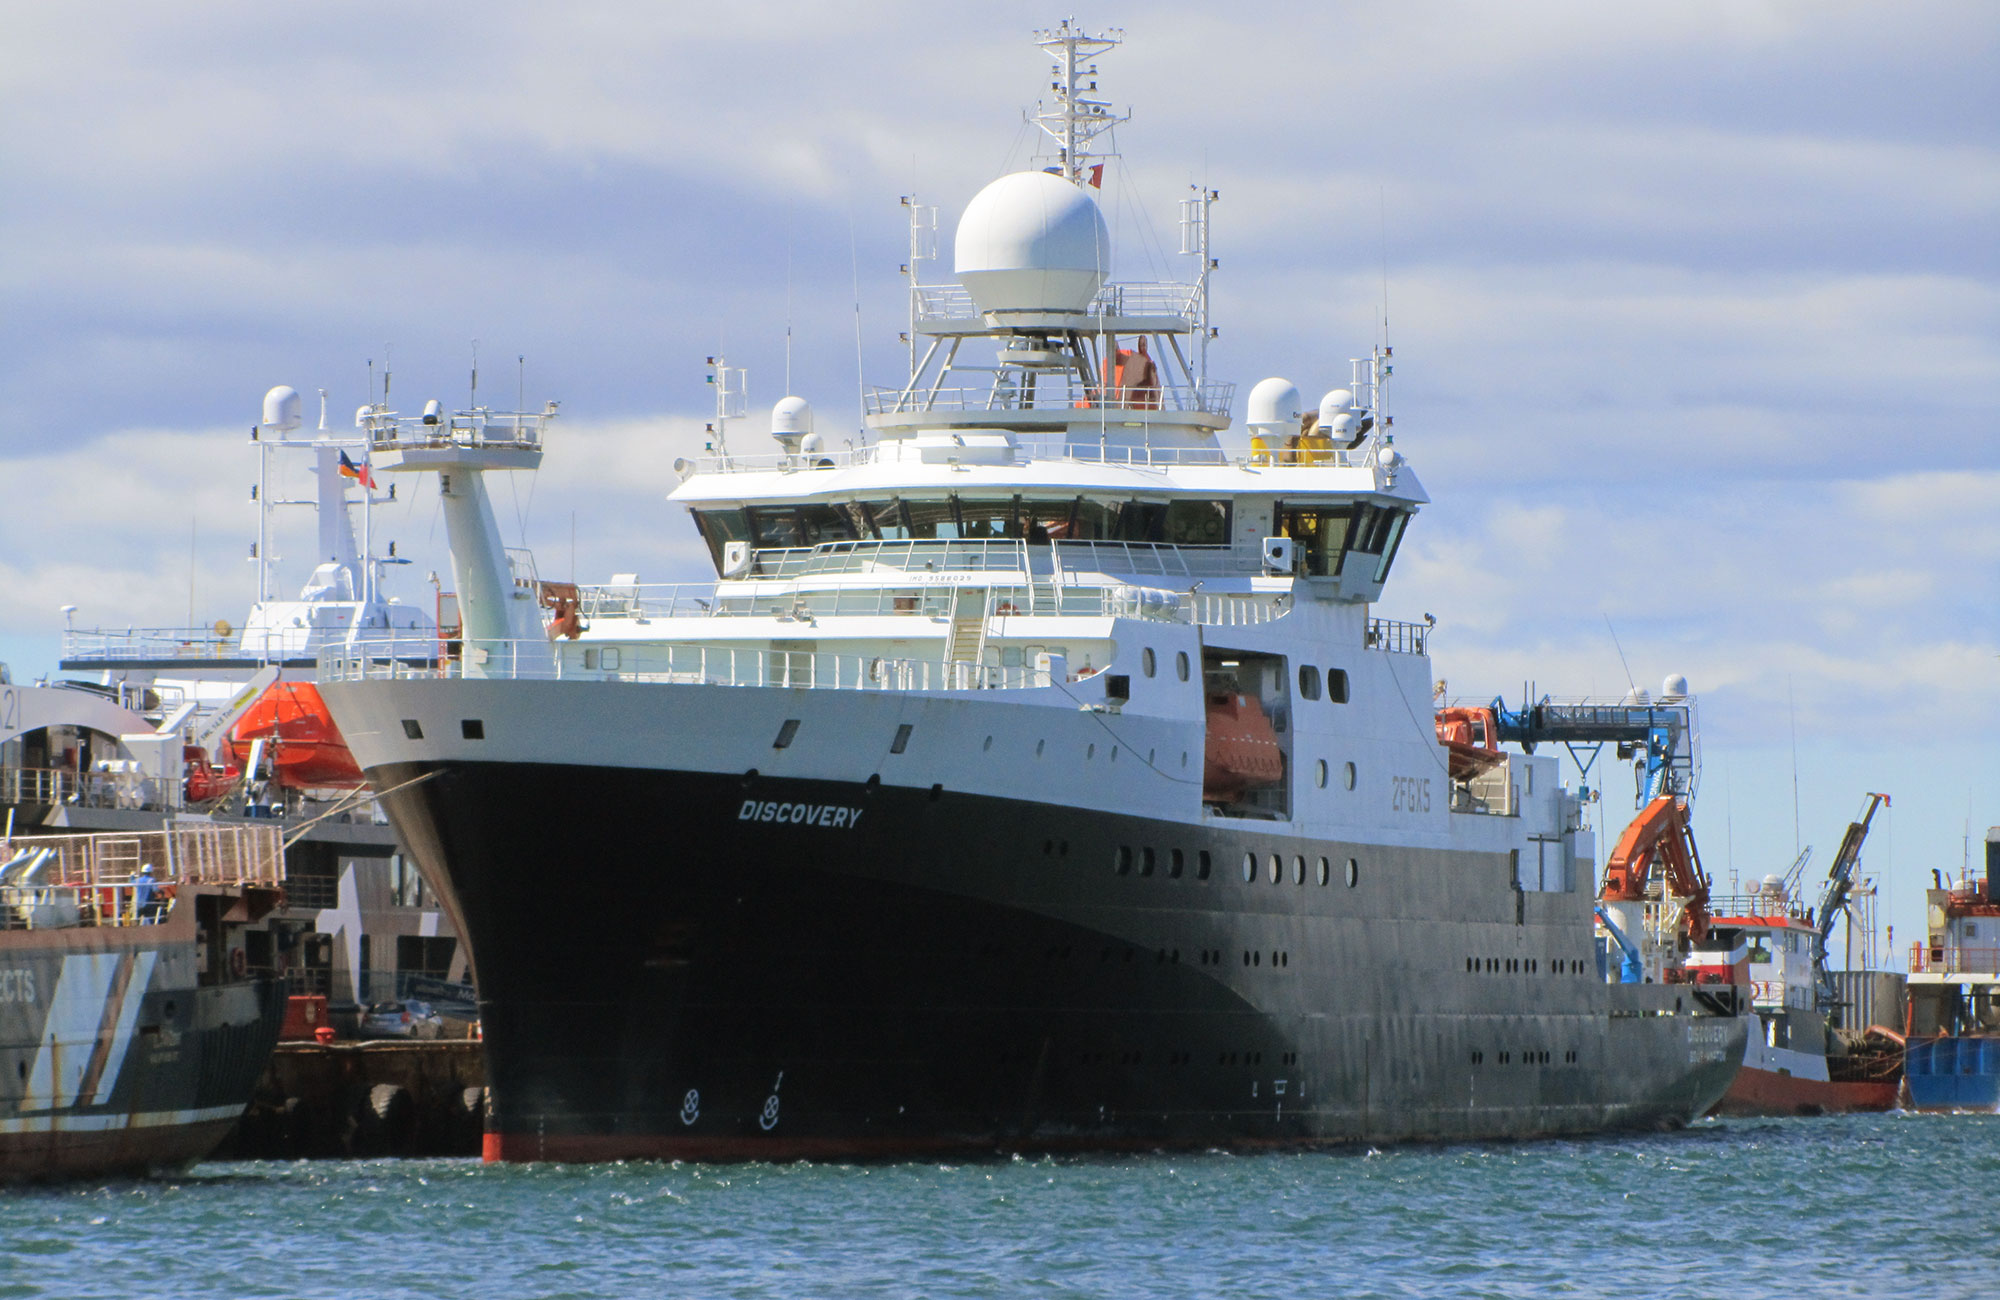 The RRS Discovery research ship in port